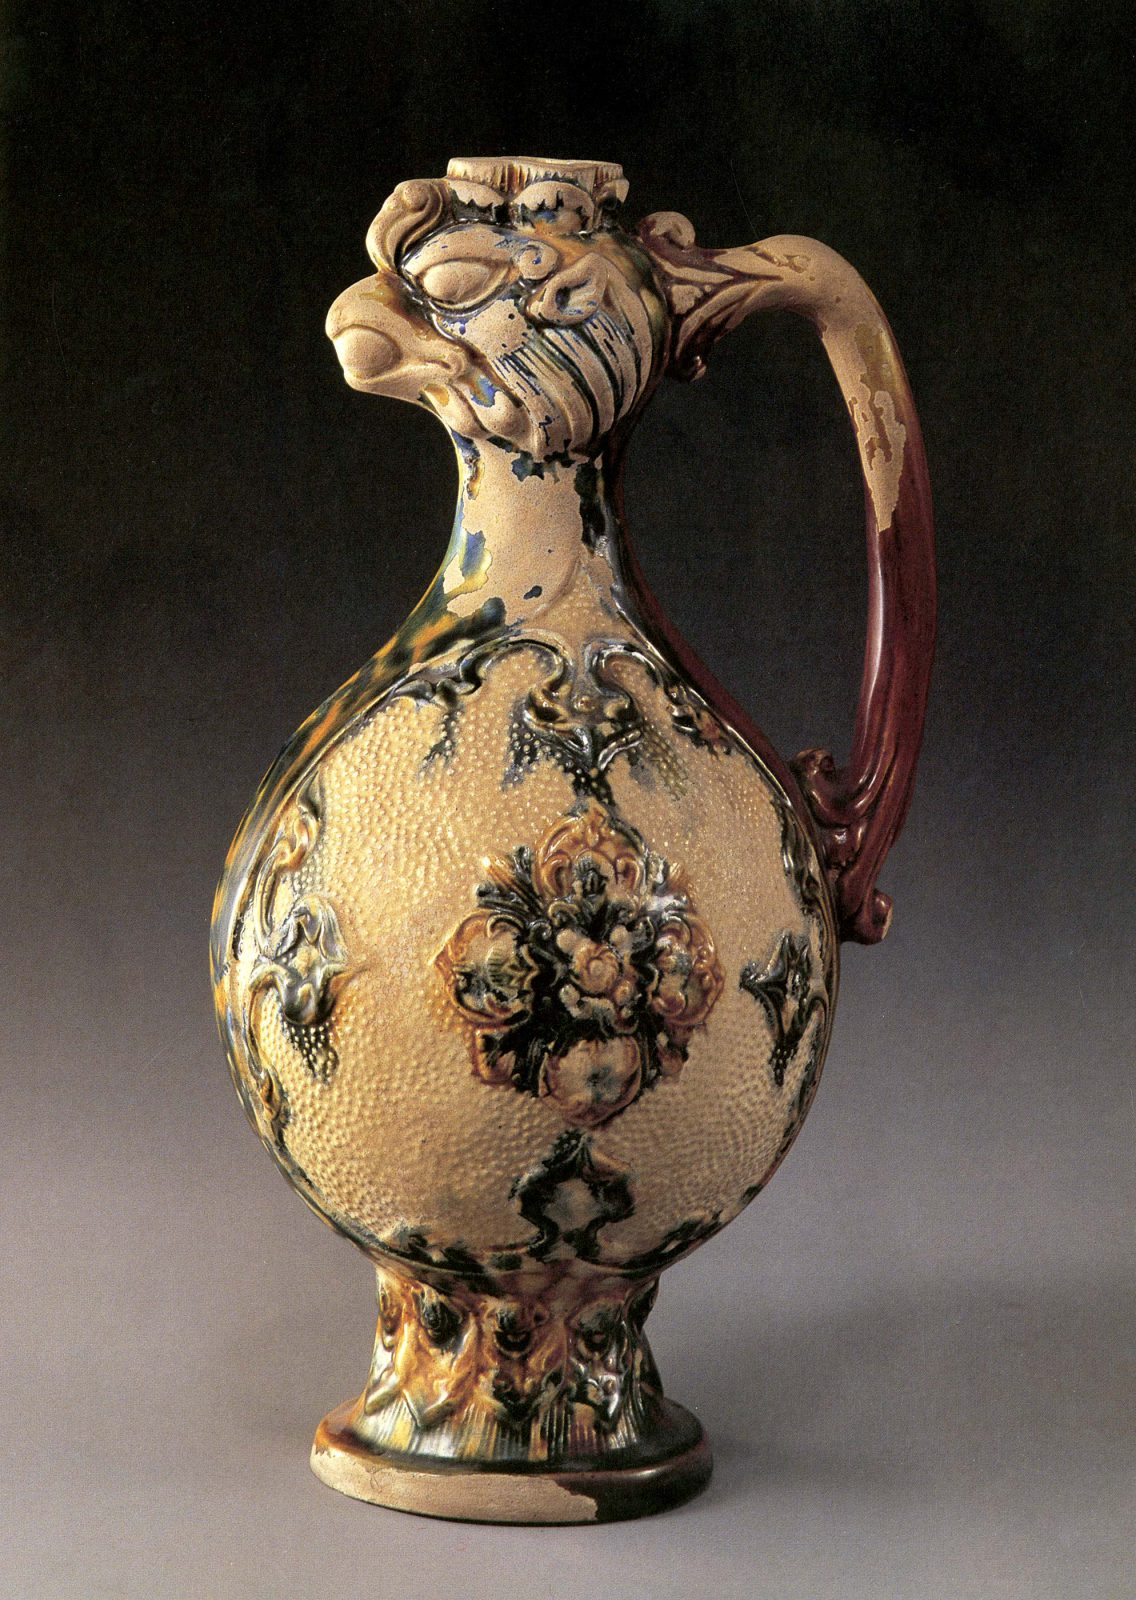 Ewer with bulbous body and bird face opening